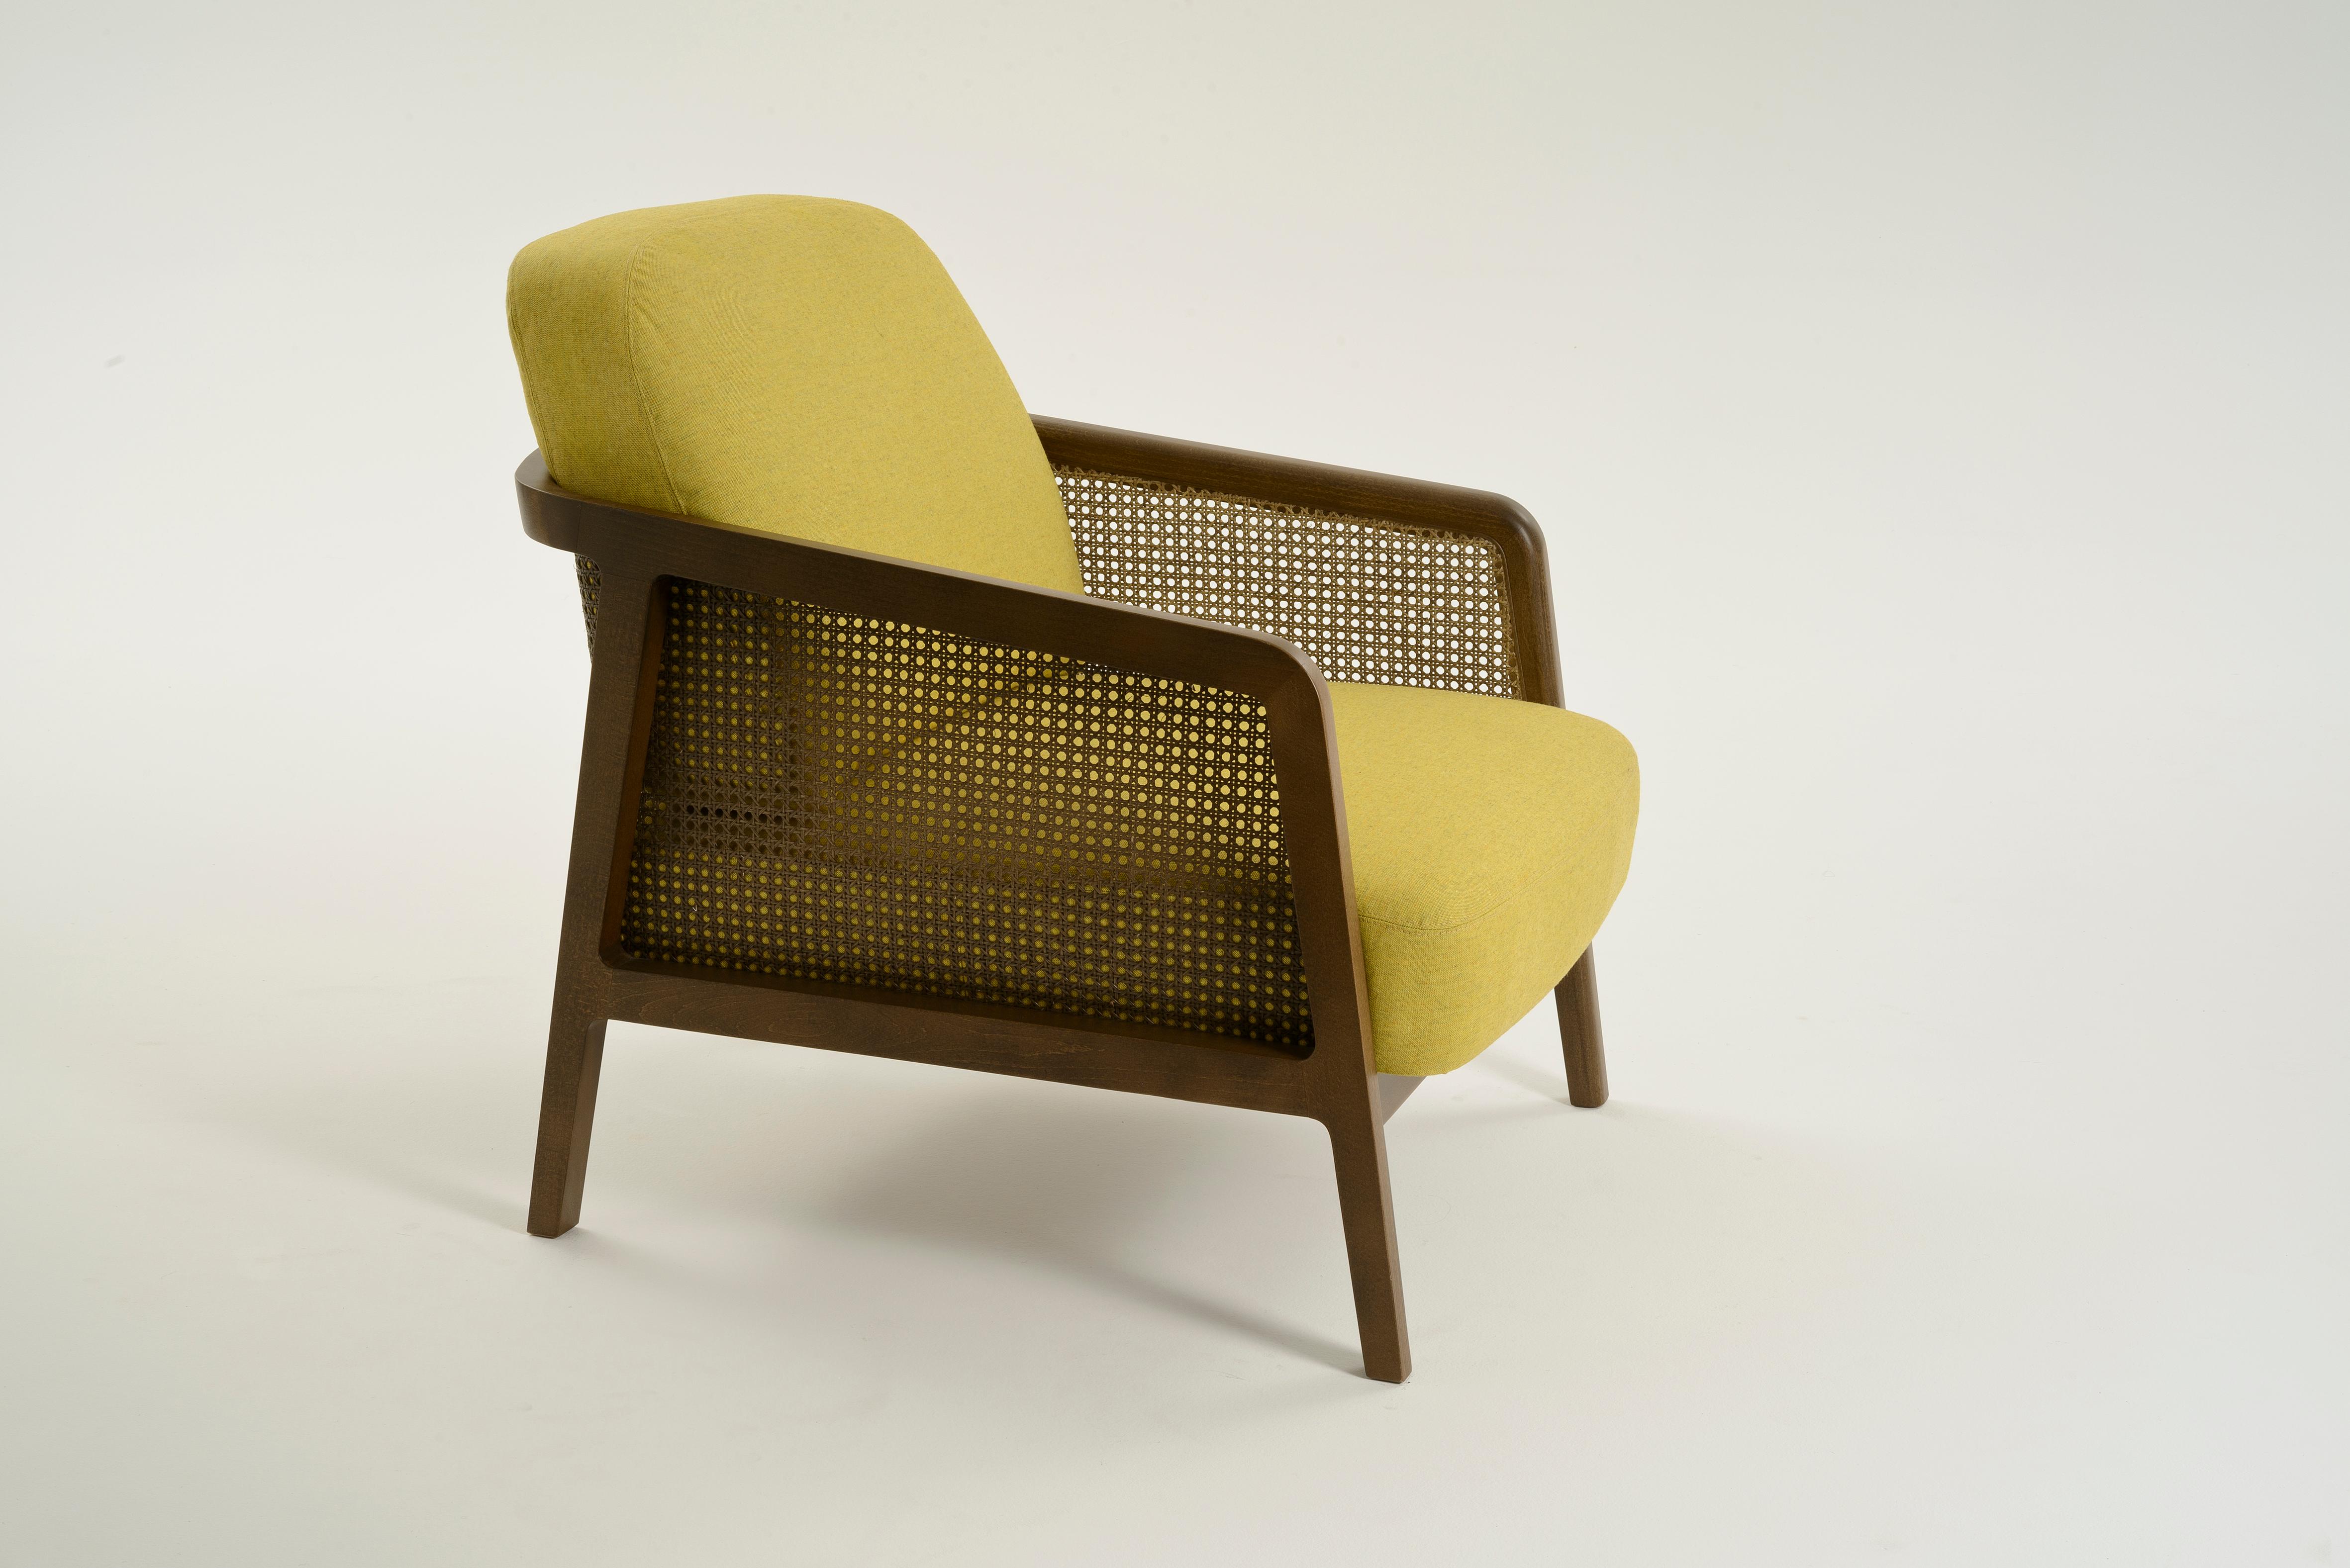 A living room armchair in wood and straw, that recalls the exclusive club atmosphere but in a contemporary key. Vienna is an extraordinarily comfortable and elegant lounge armchair designed by Emmanuel Gallina who loves to quote Brancusi when saying